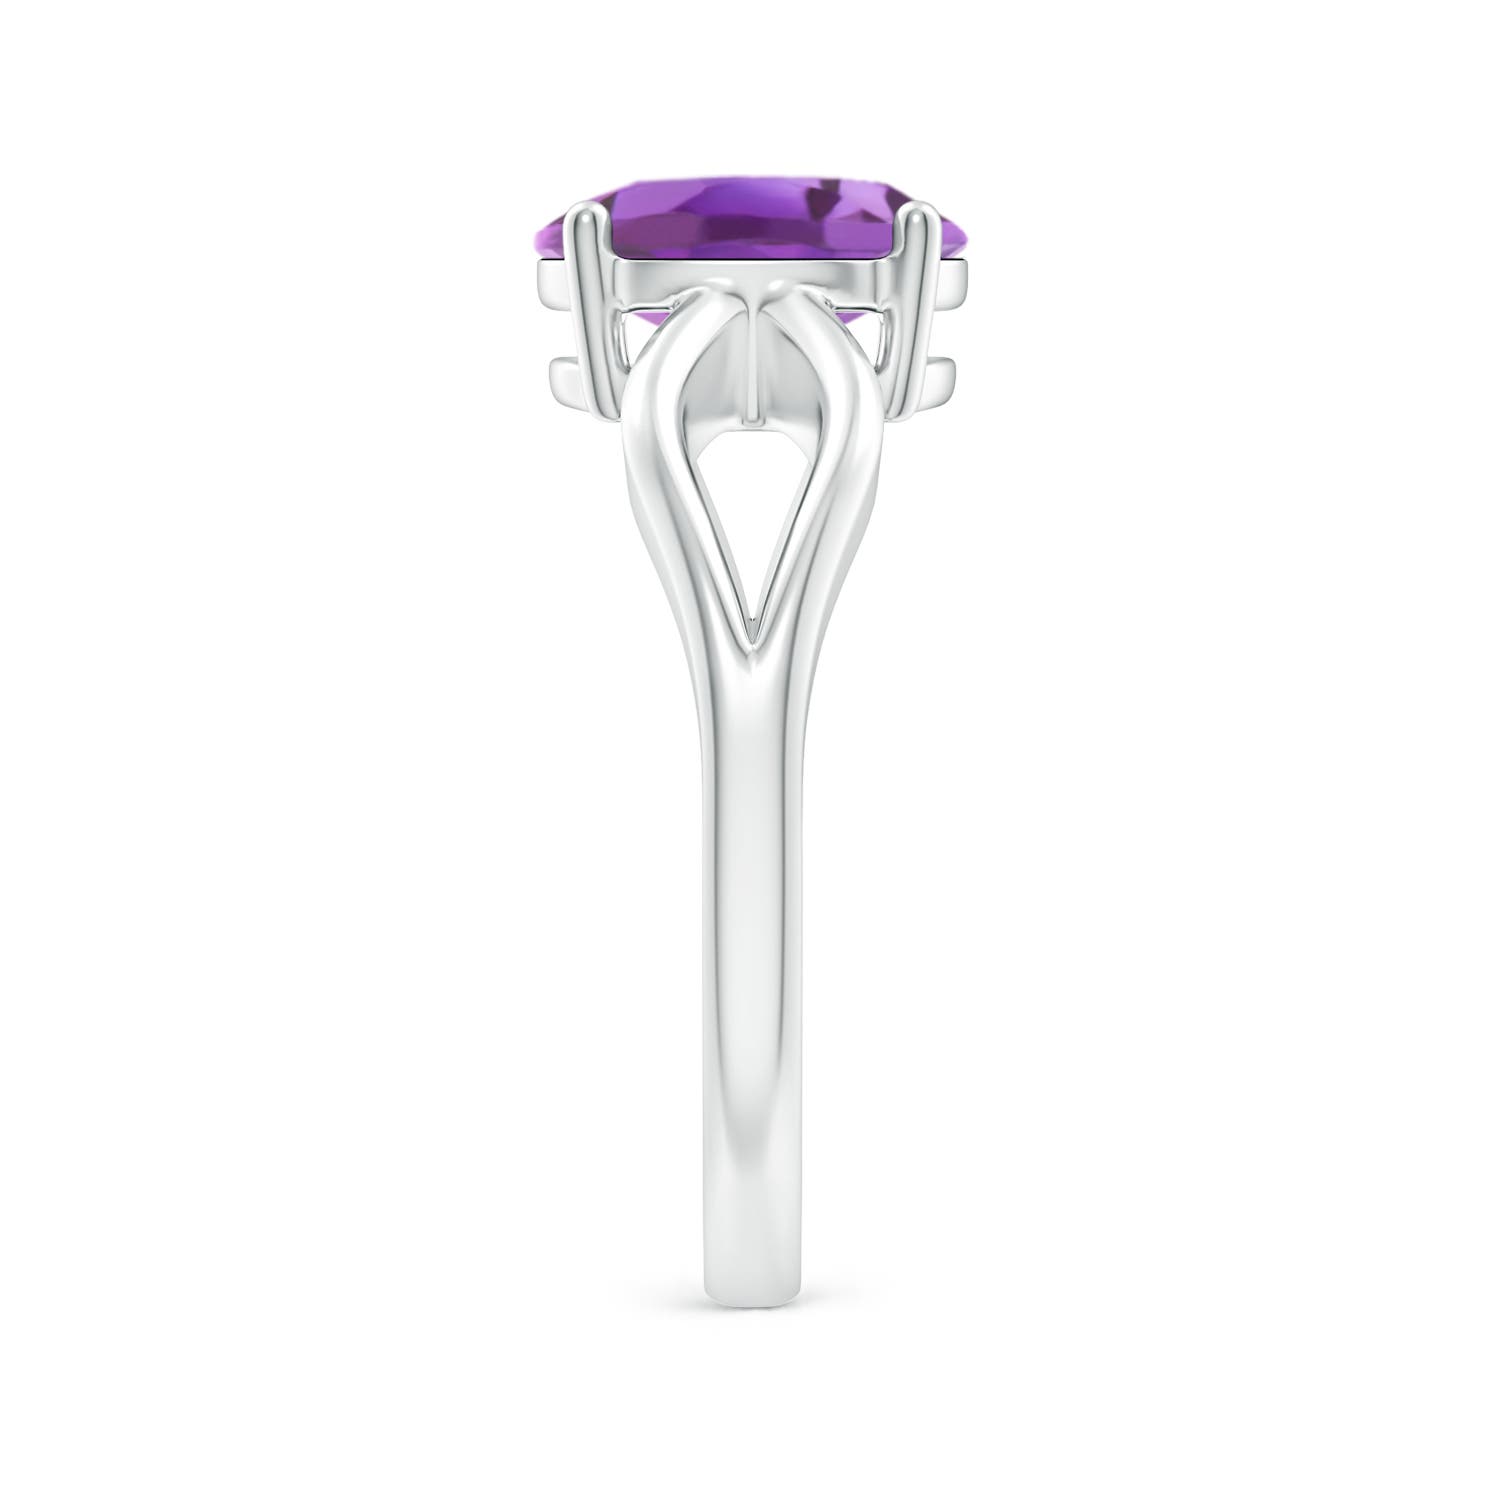 A - Amethyst / 1.6 CT / 14 KT White Gold